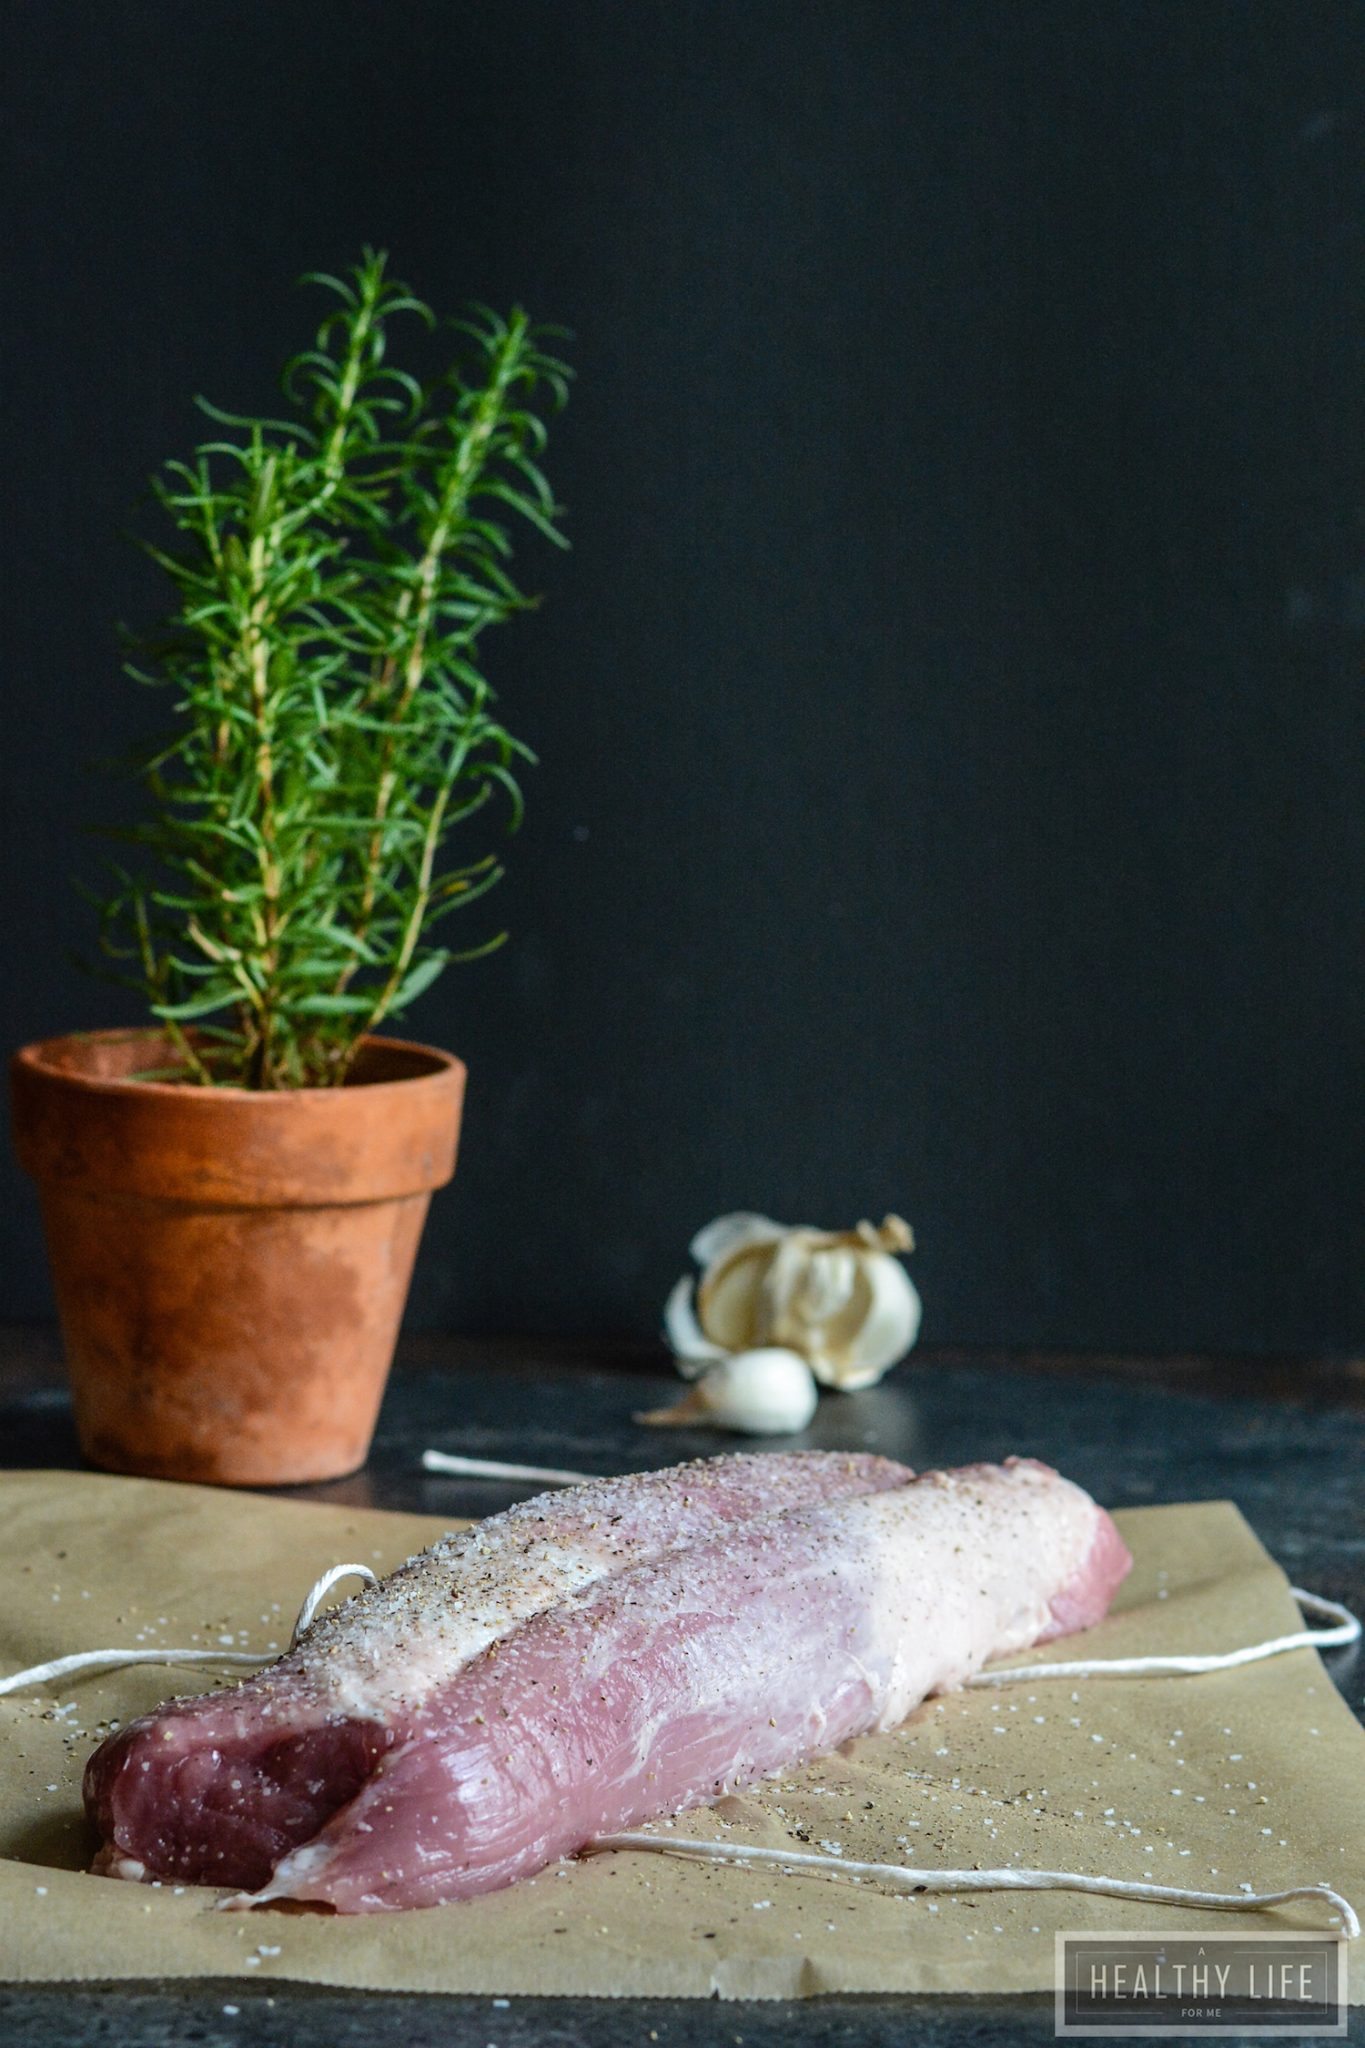 Raw pork tenderloin in front of a rosemary plant